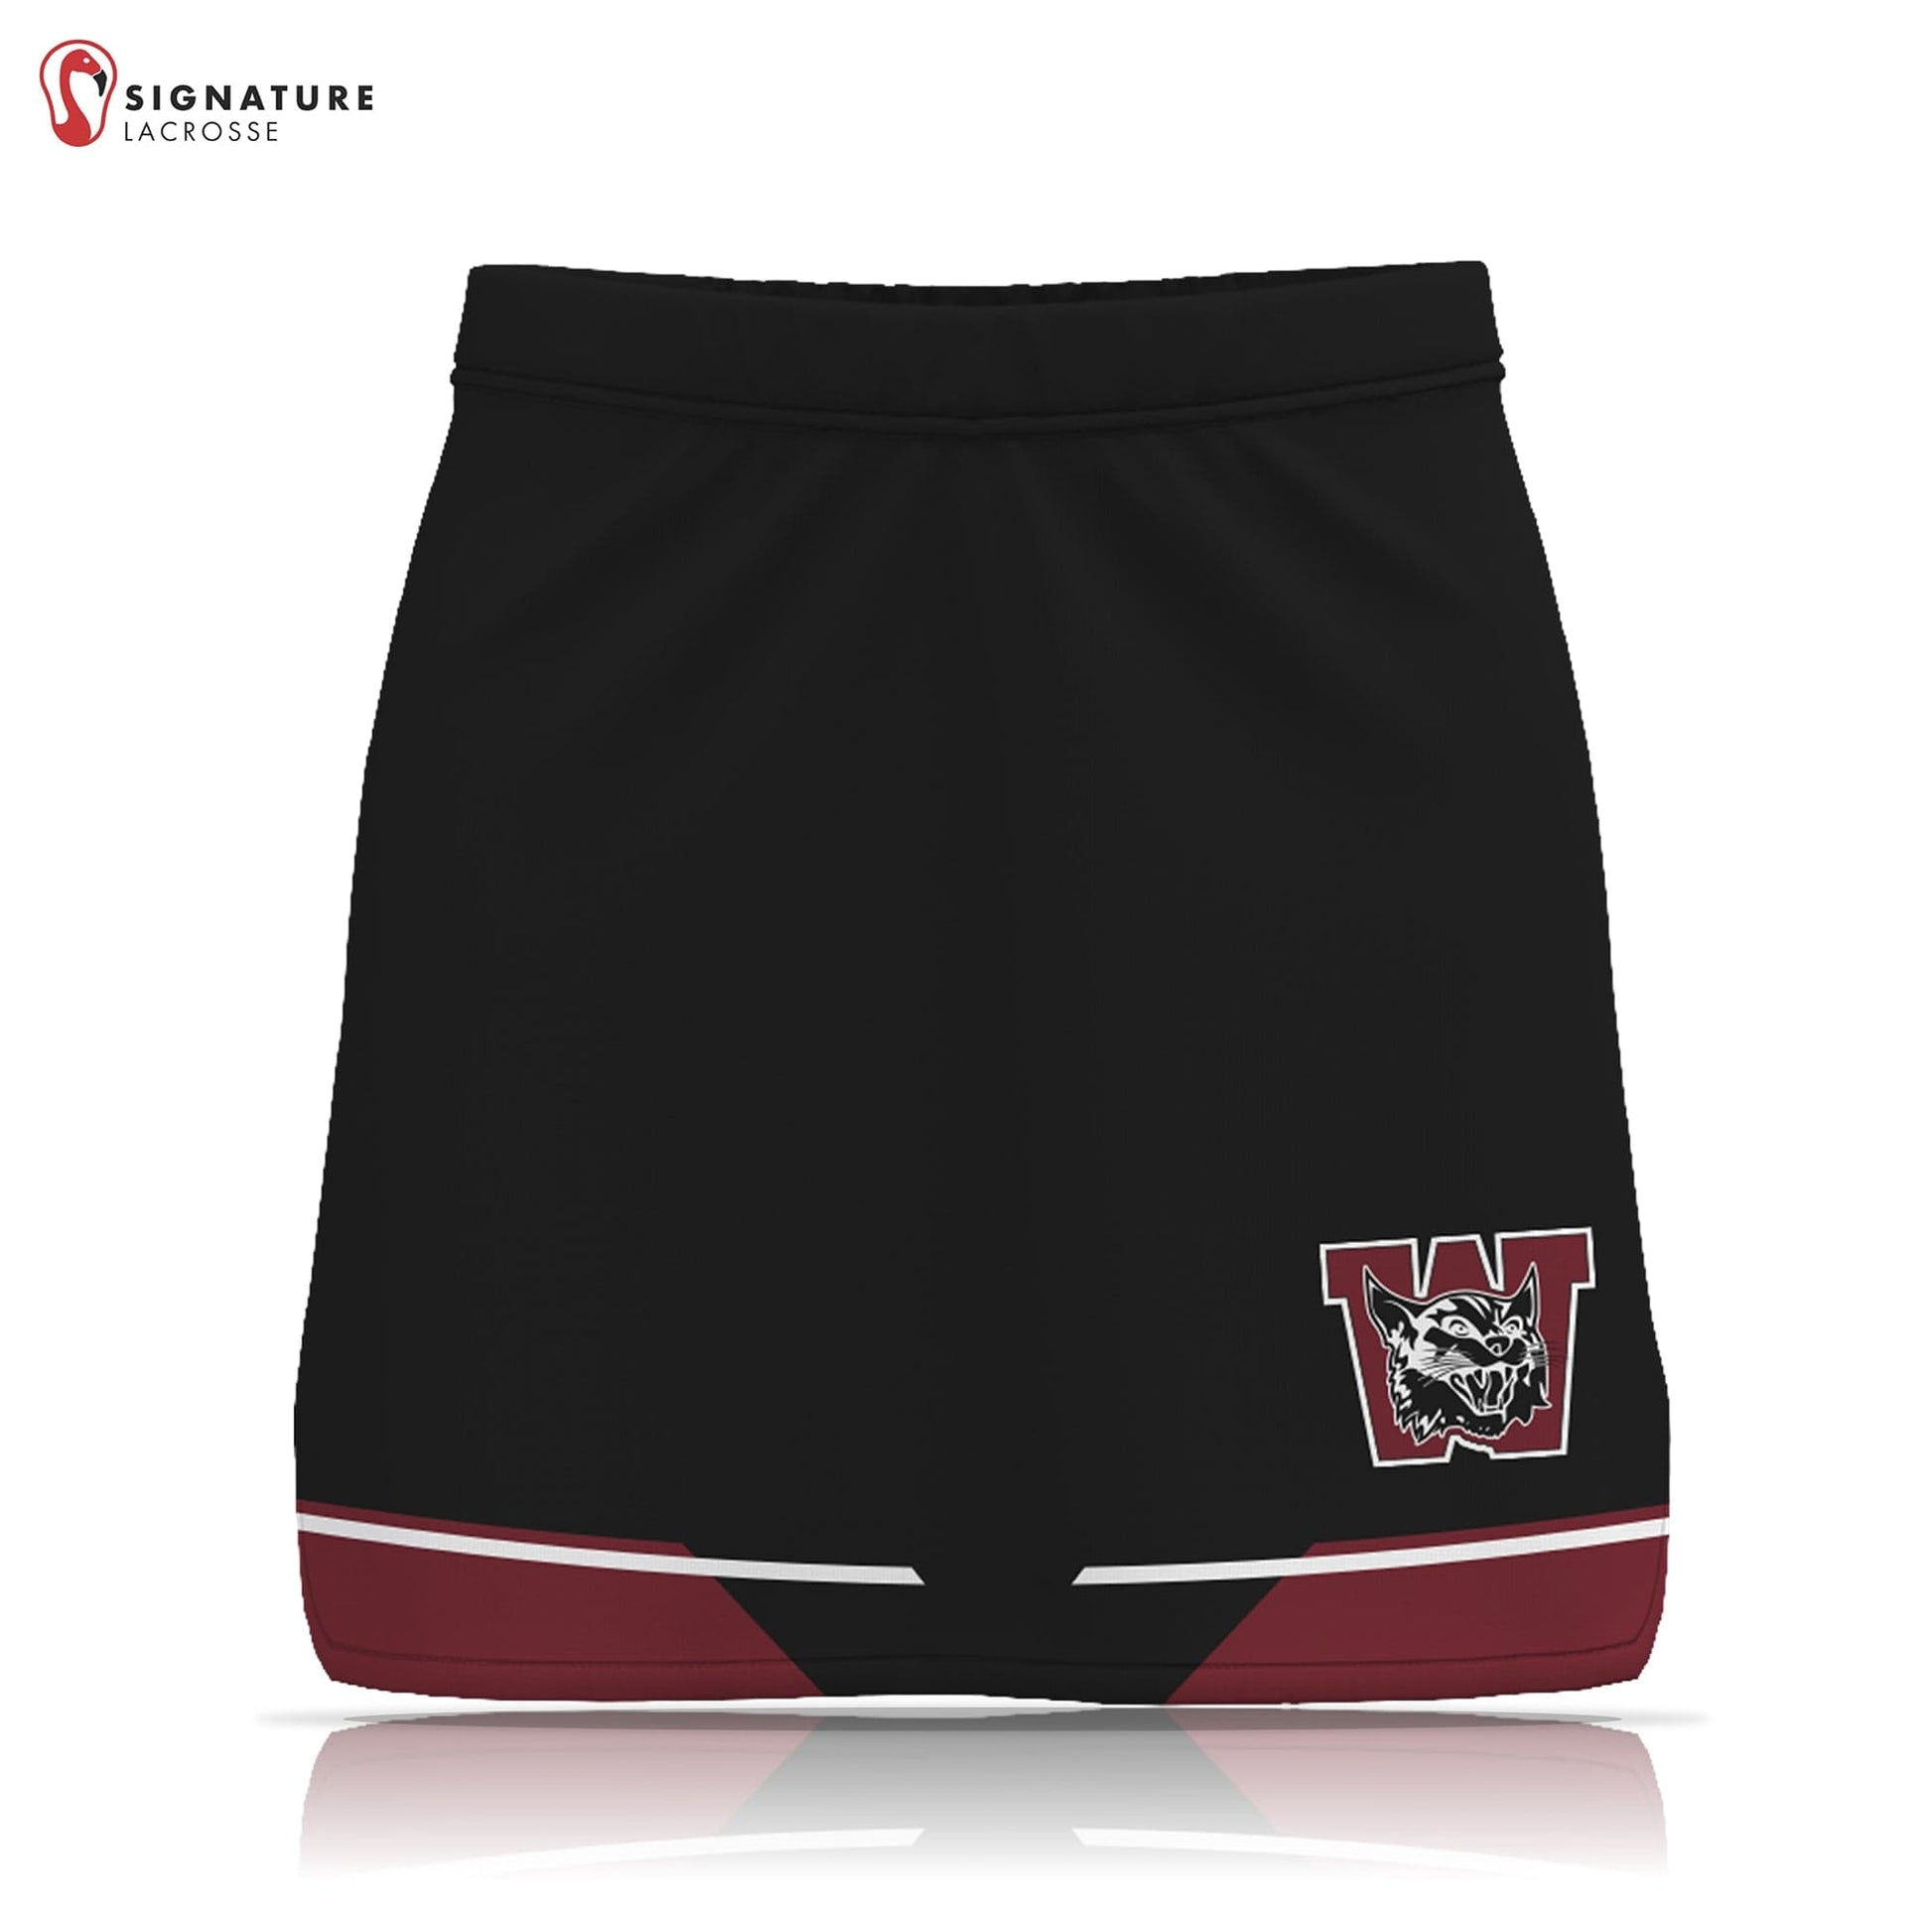 Weston Youth Lacrosse Women's Player Game Skirt: Grade 7-8 Signature Lacrosse